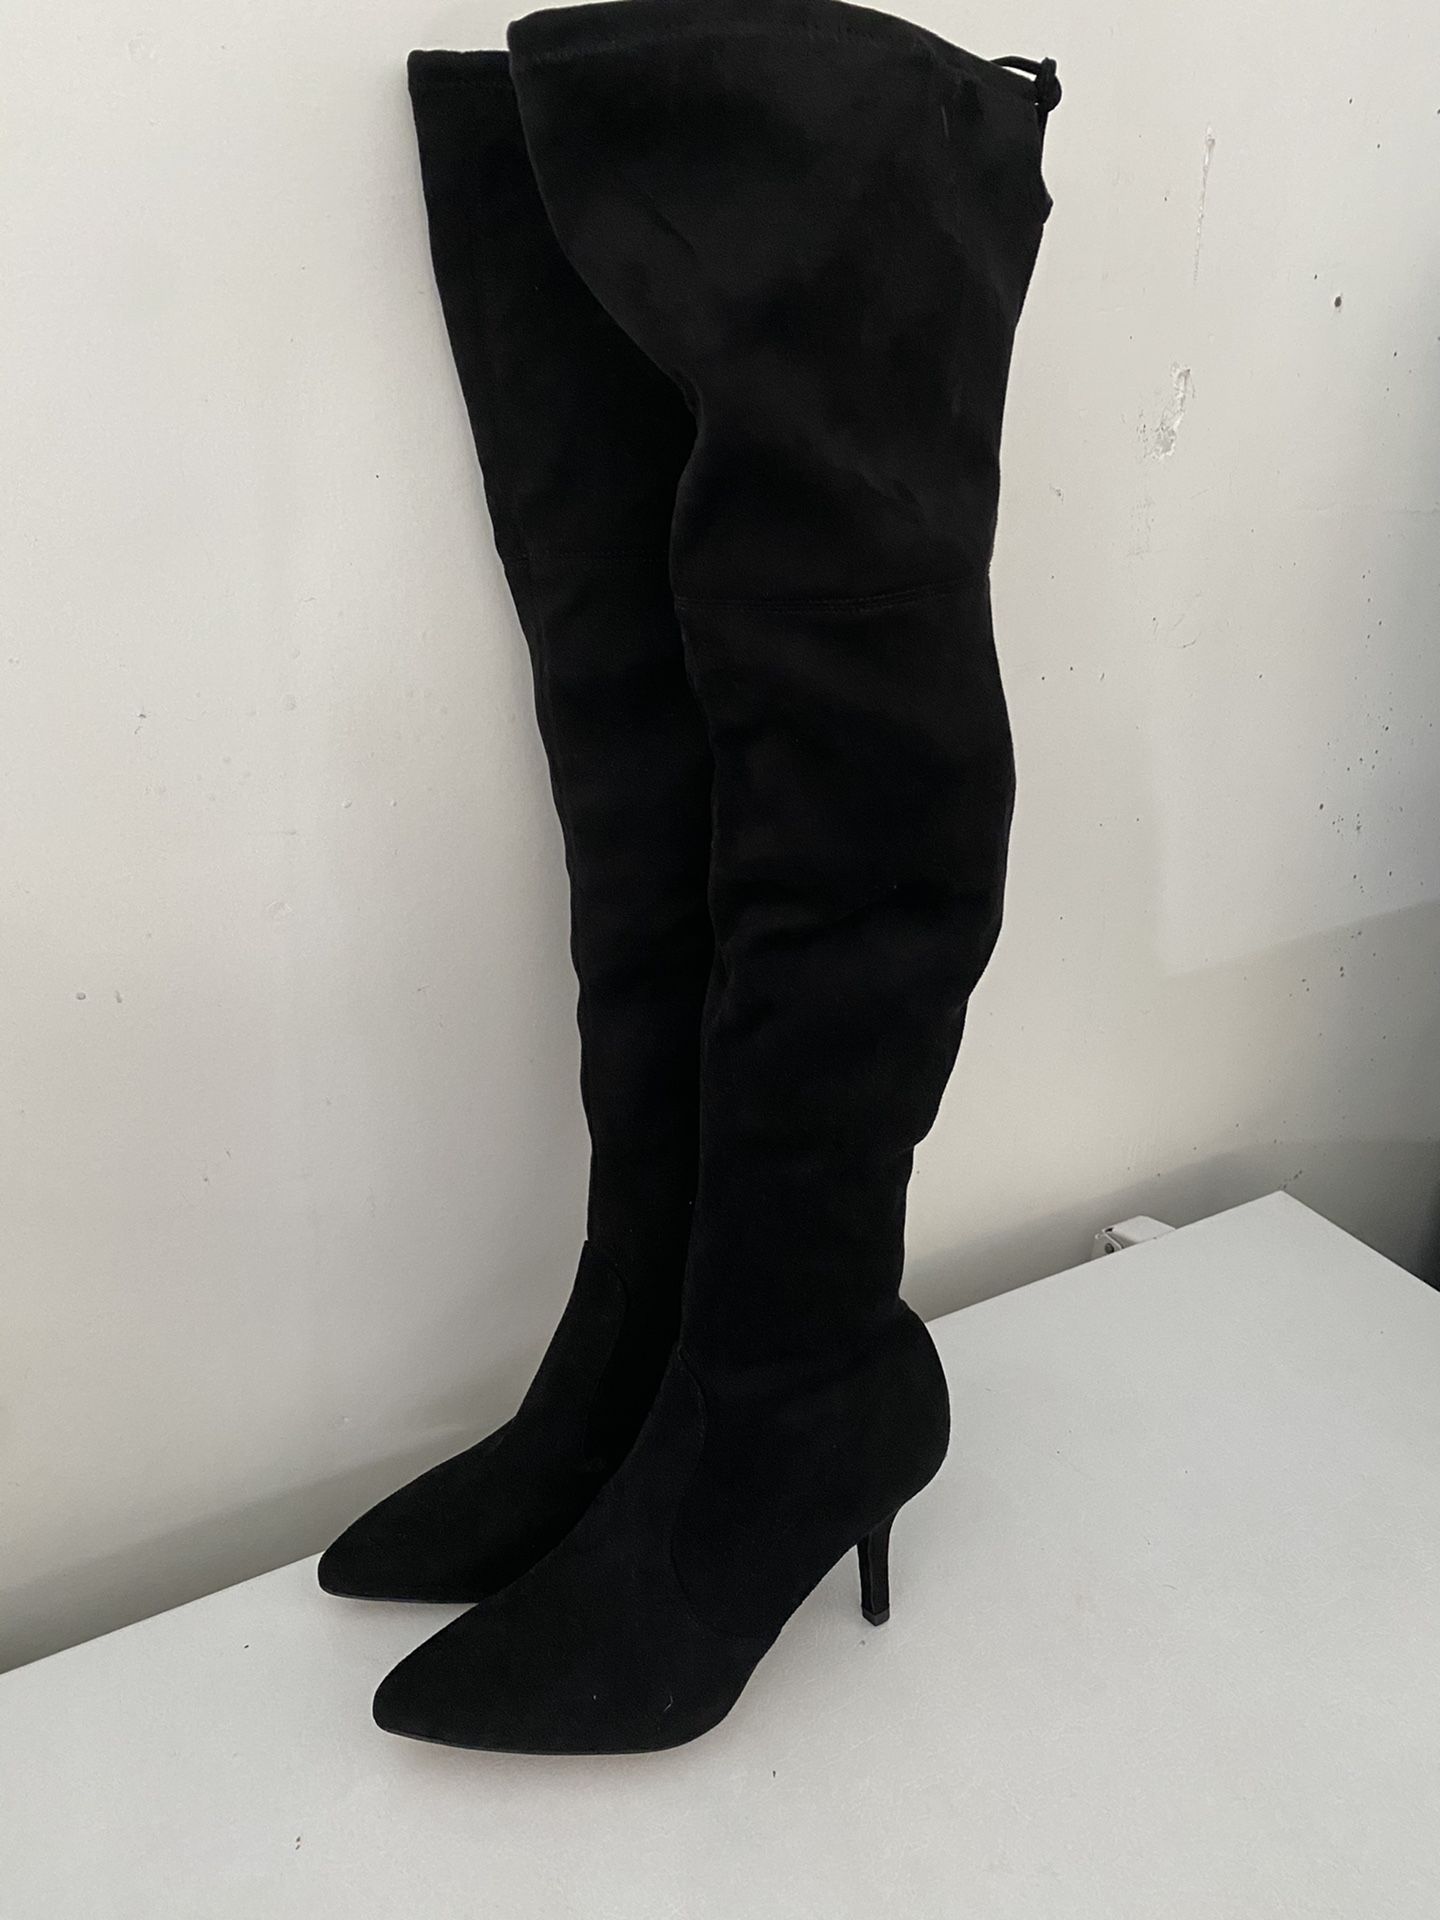 Vince Camuto Thigh High Heeled boots Size 8